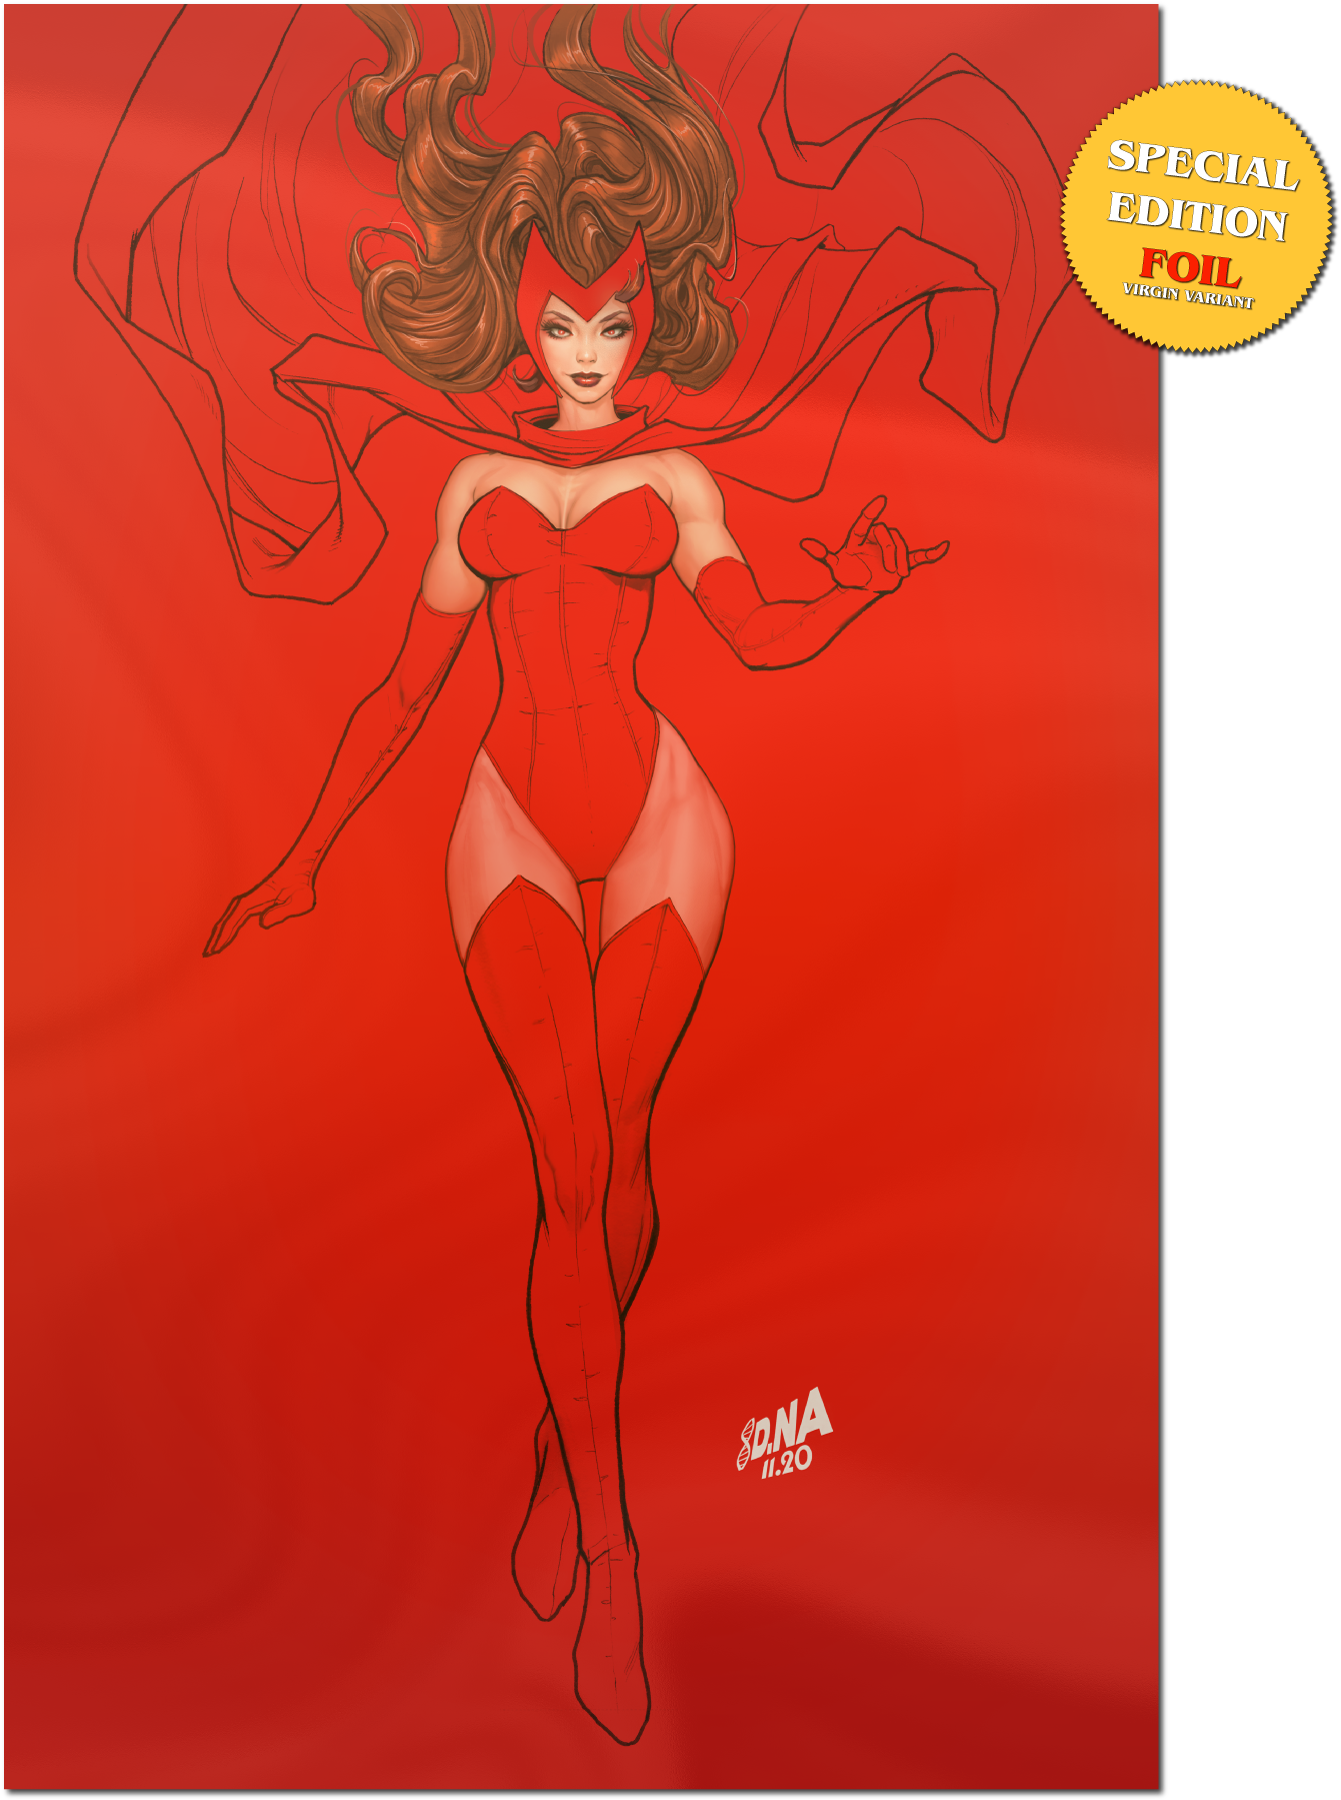 Scarlet Witch Annual #1 Reviews